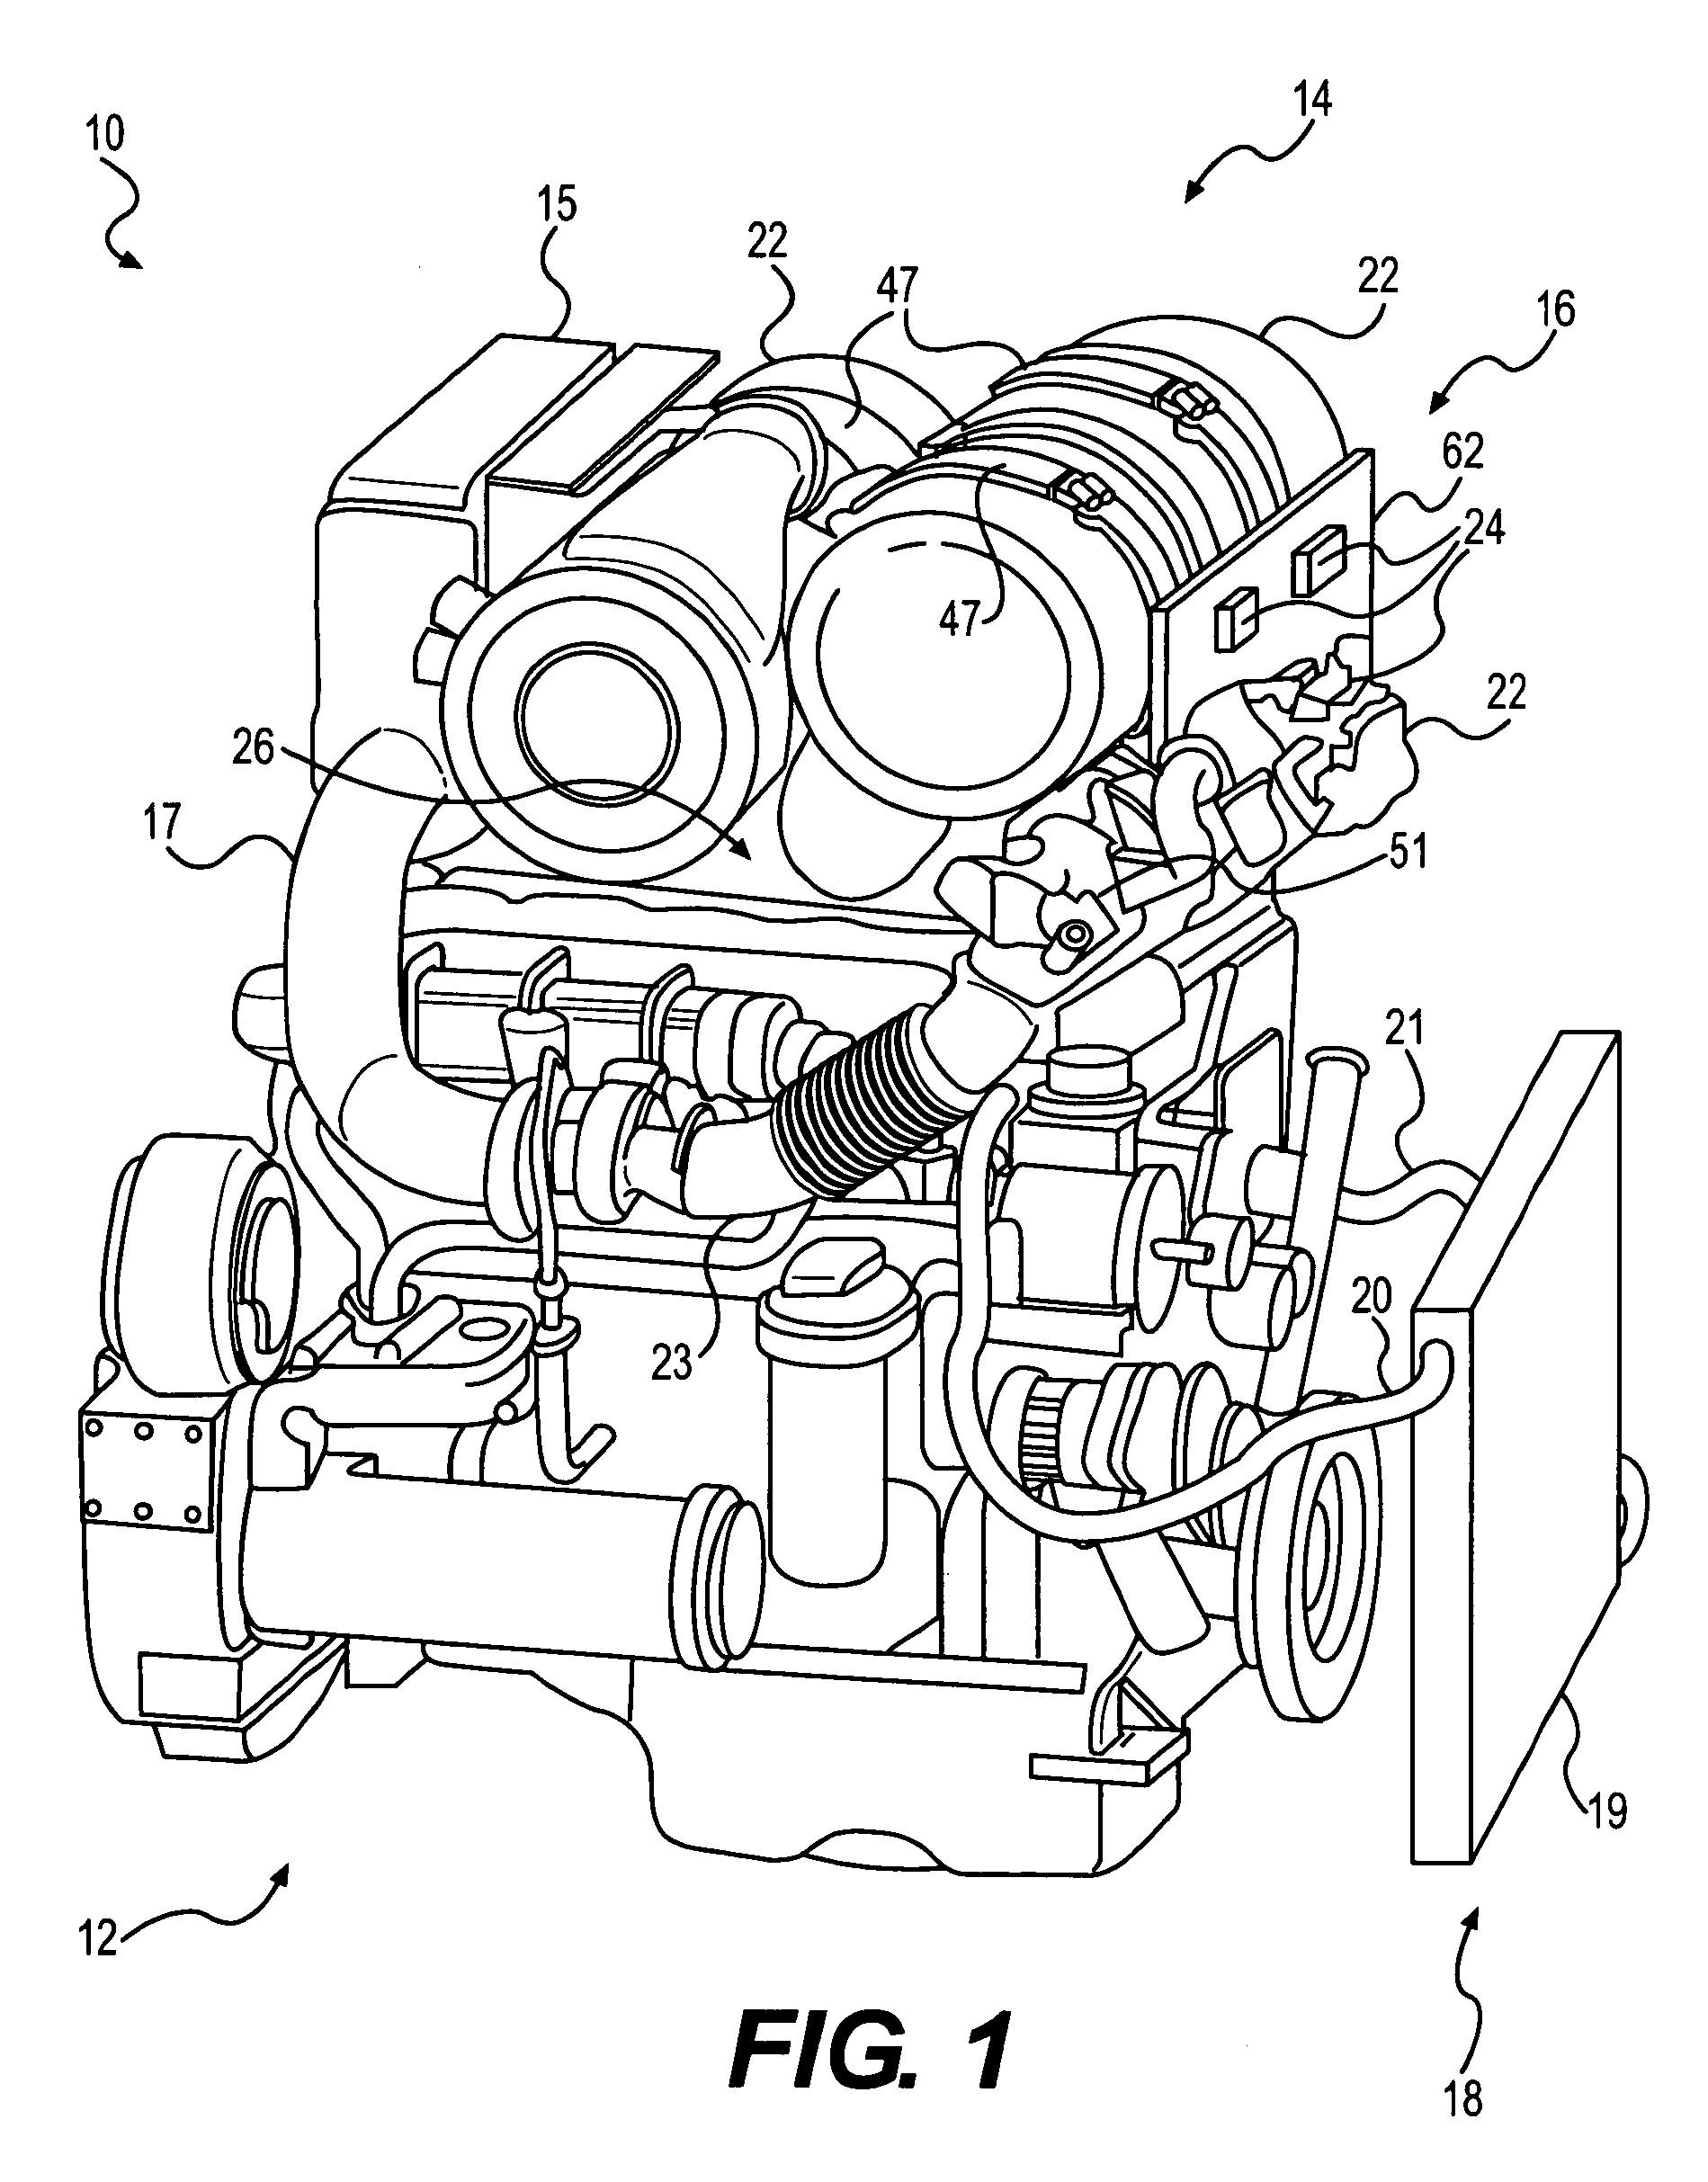 Mounting and cooling device for emissions system electronics